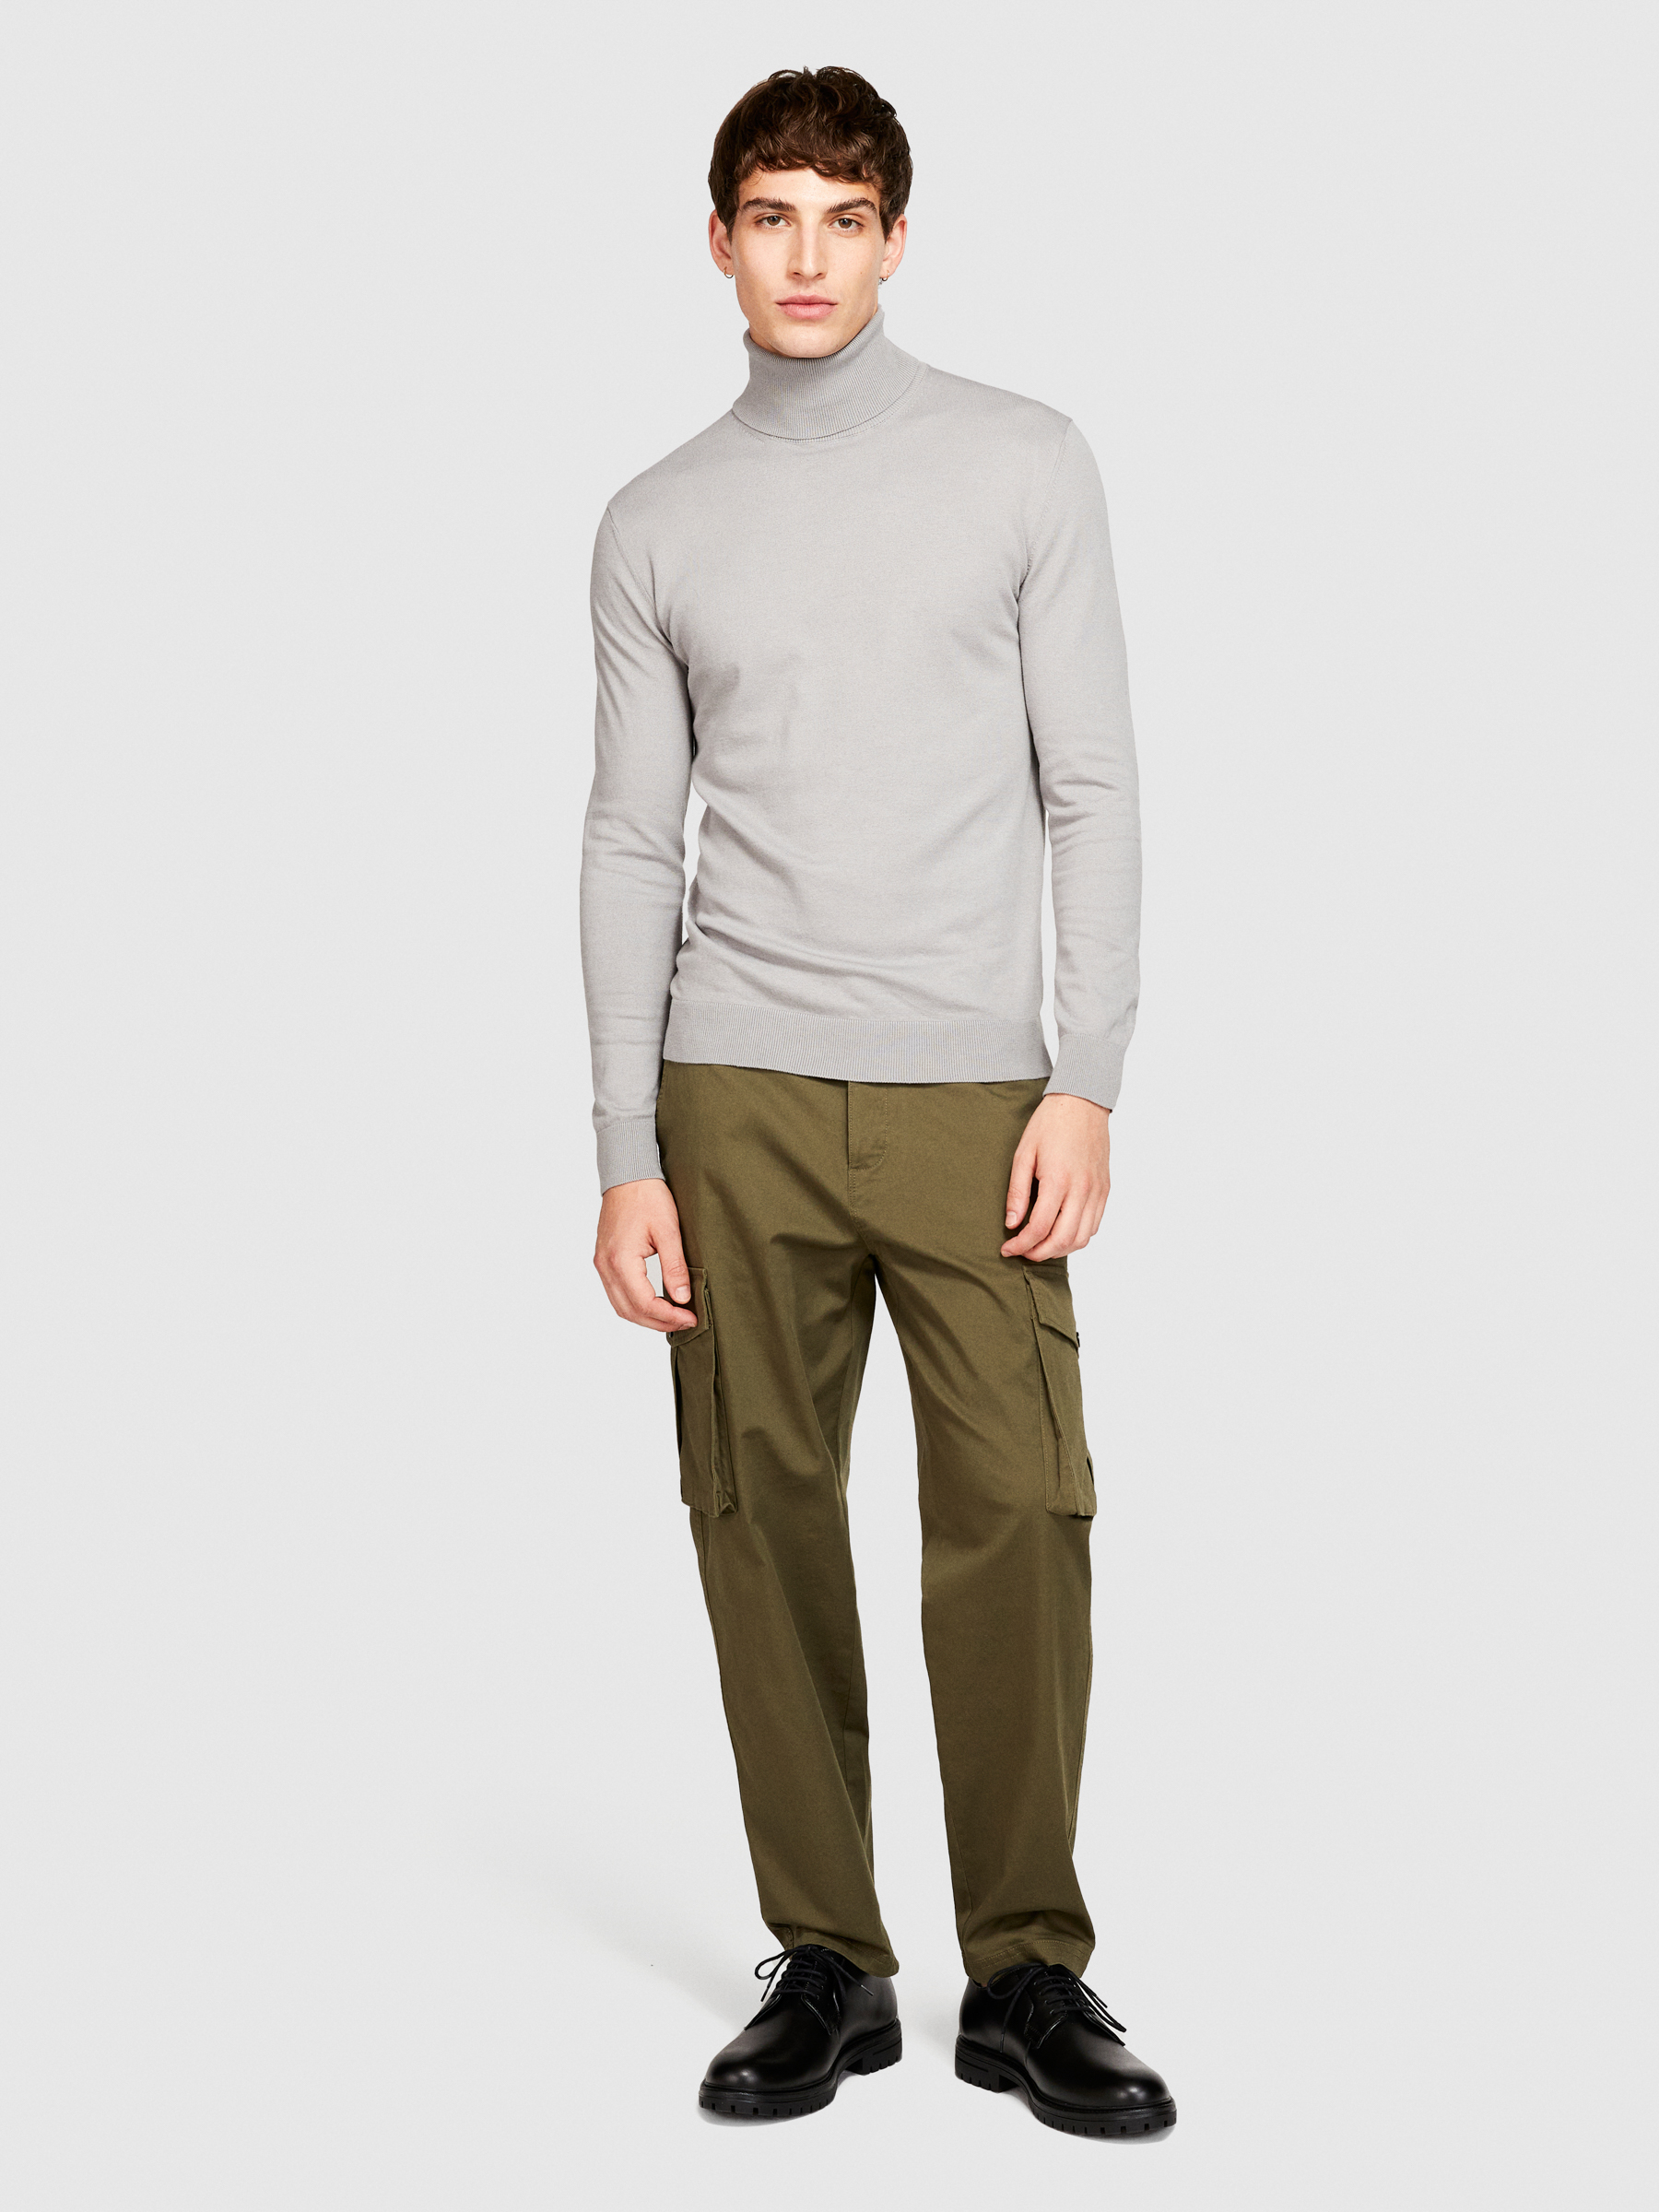 Sisley - Solid Colored Sweater With High Collar, Man, Light Gray, Size: S